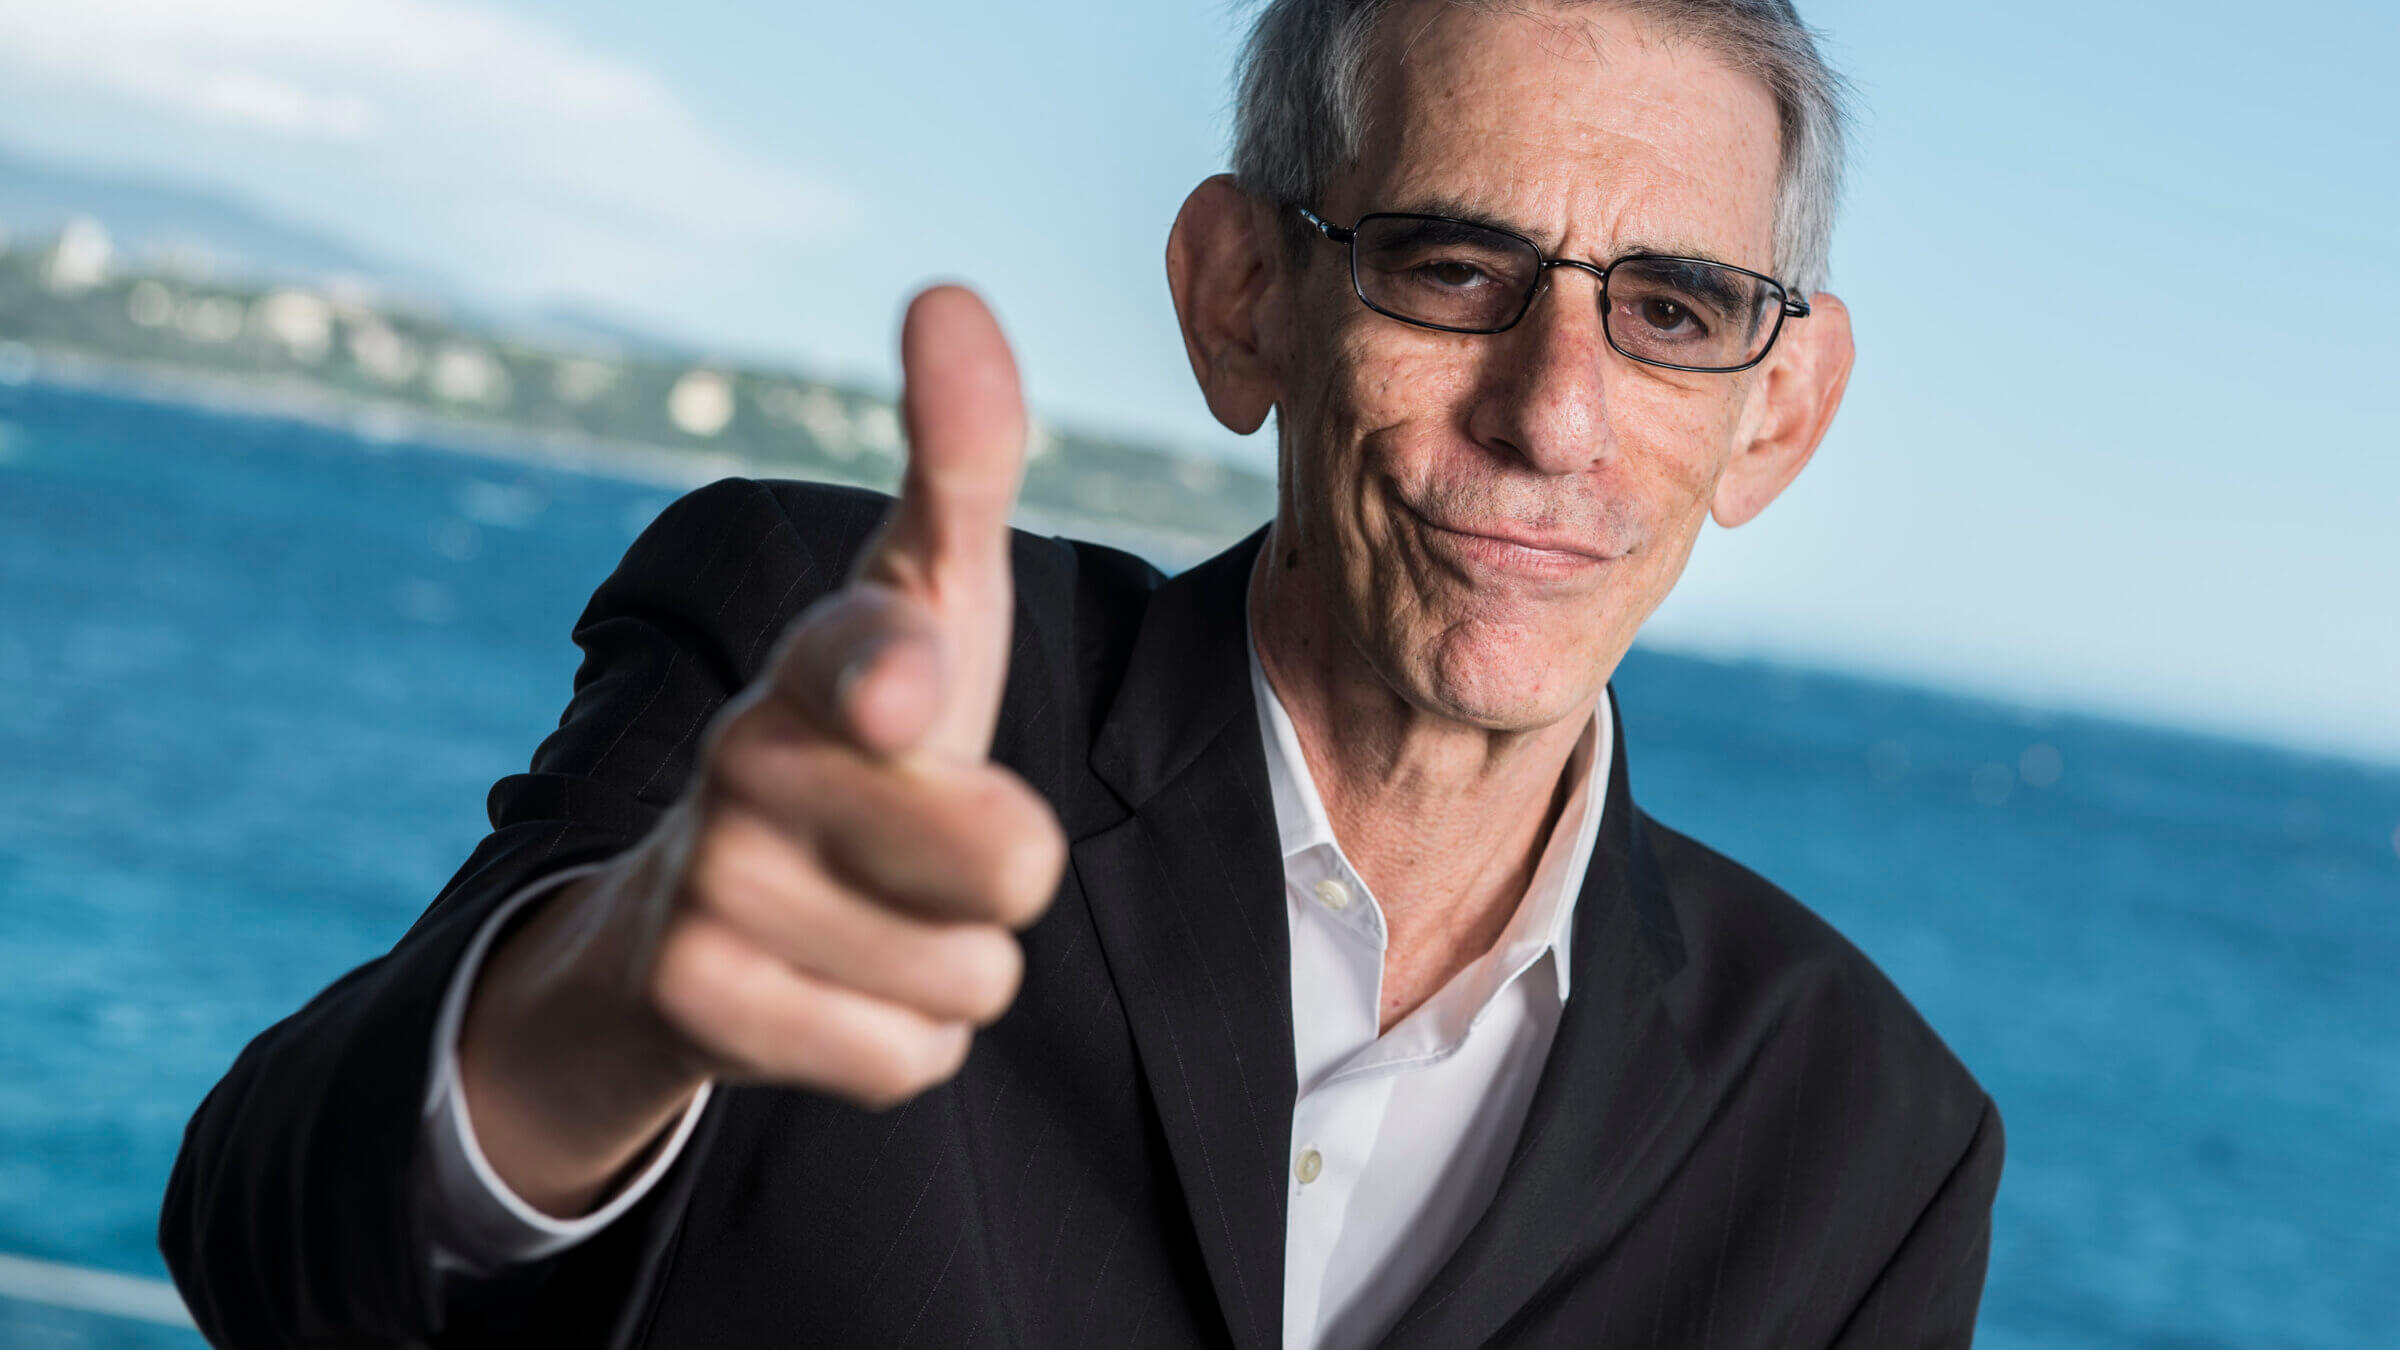 Richard Belzer played John Munch, a character whose penchant for conspiracy theories mirrored Belzer's real life.